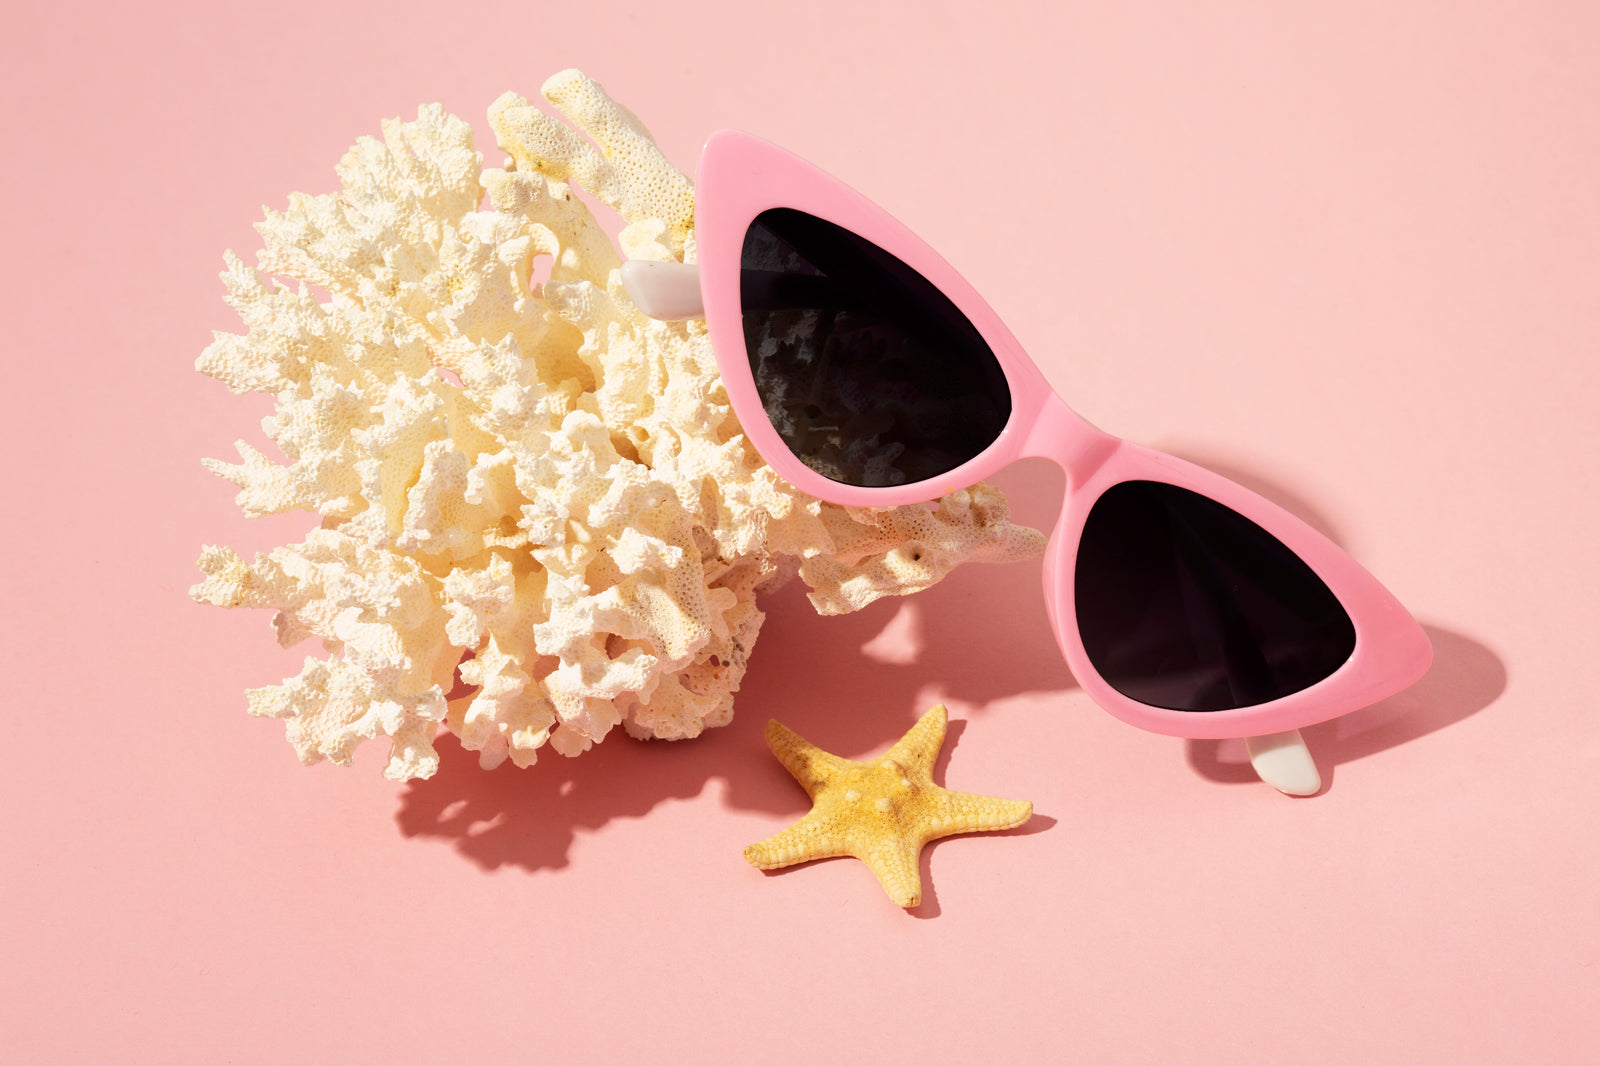 Excited to watch the Barbie movie? Check out these perfect gifts for fans of Barbie!